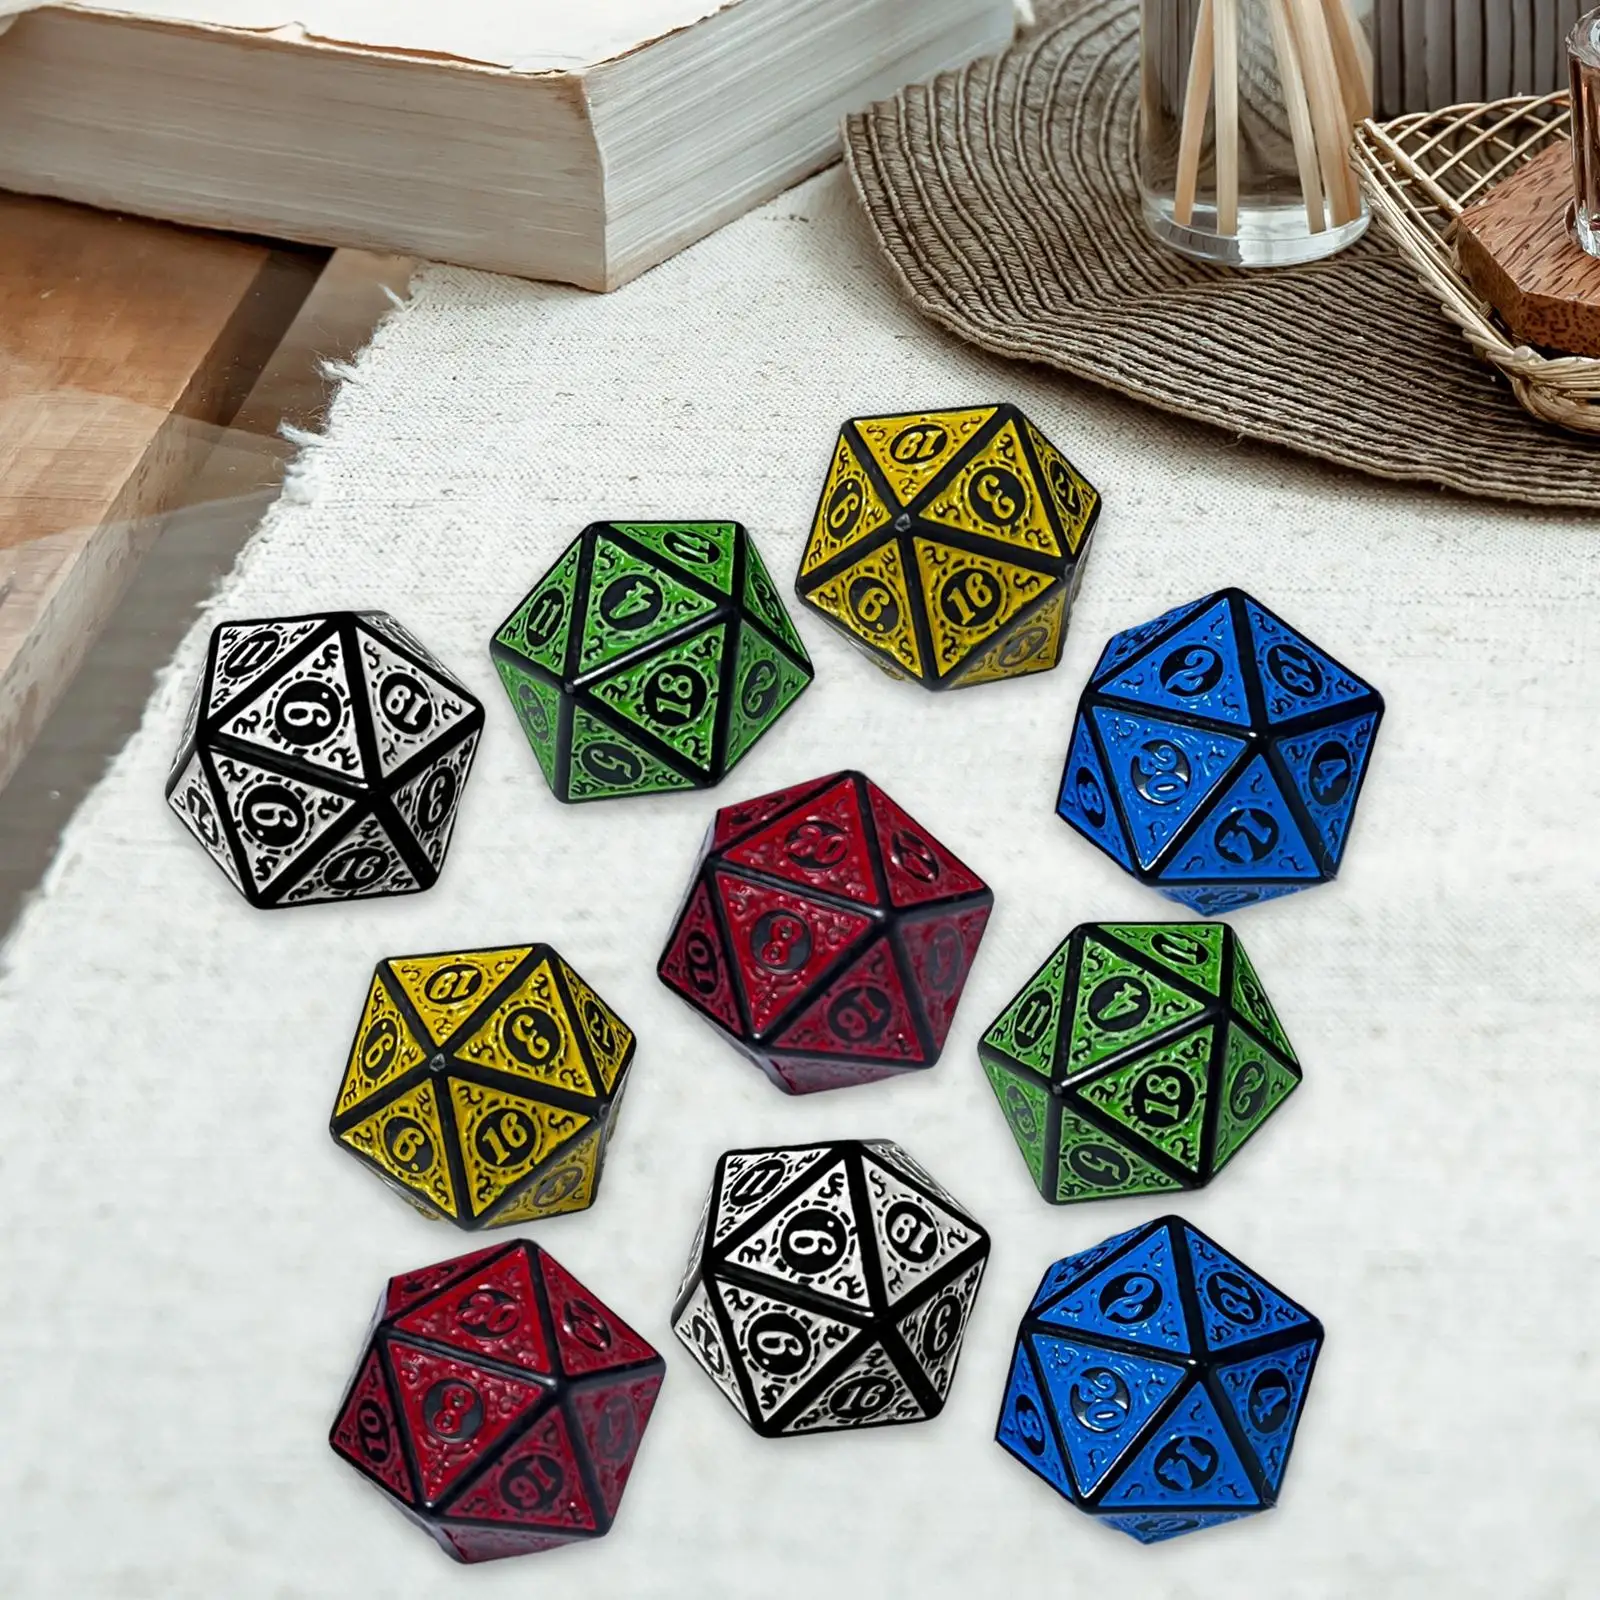 10x Astrology Dice Crafts Collectibles Entertainment Toy Constellation Dices D20 Die for Party Toy Table Games Family Gathering